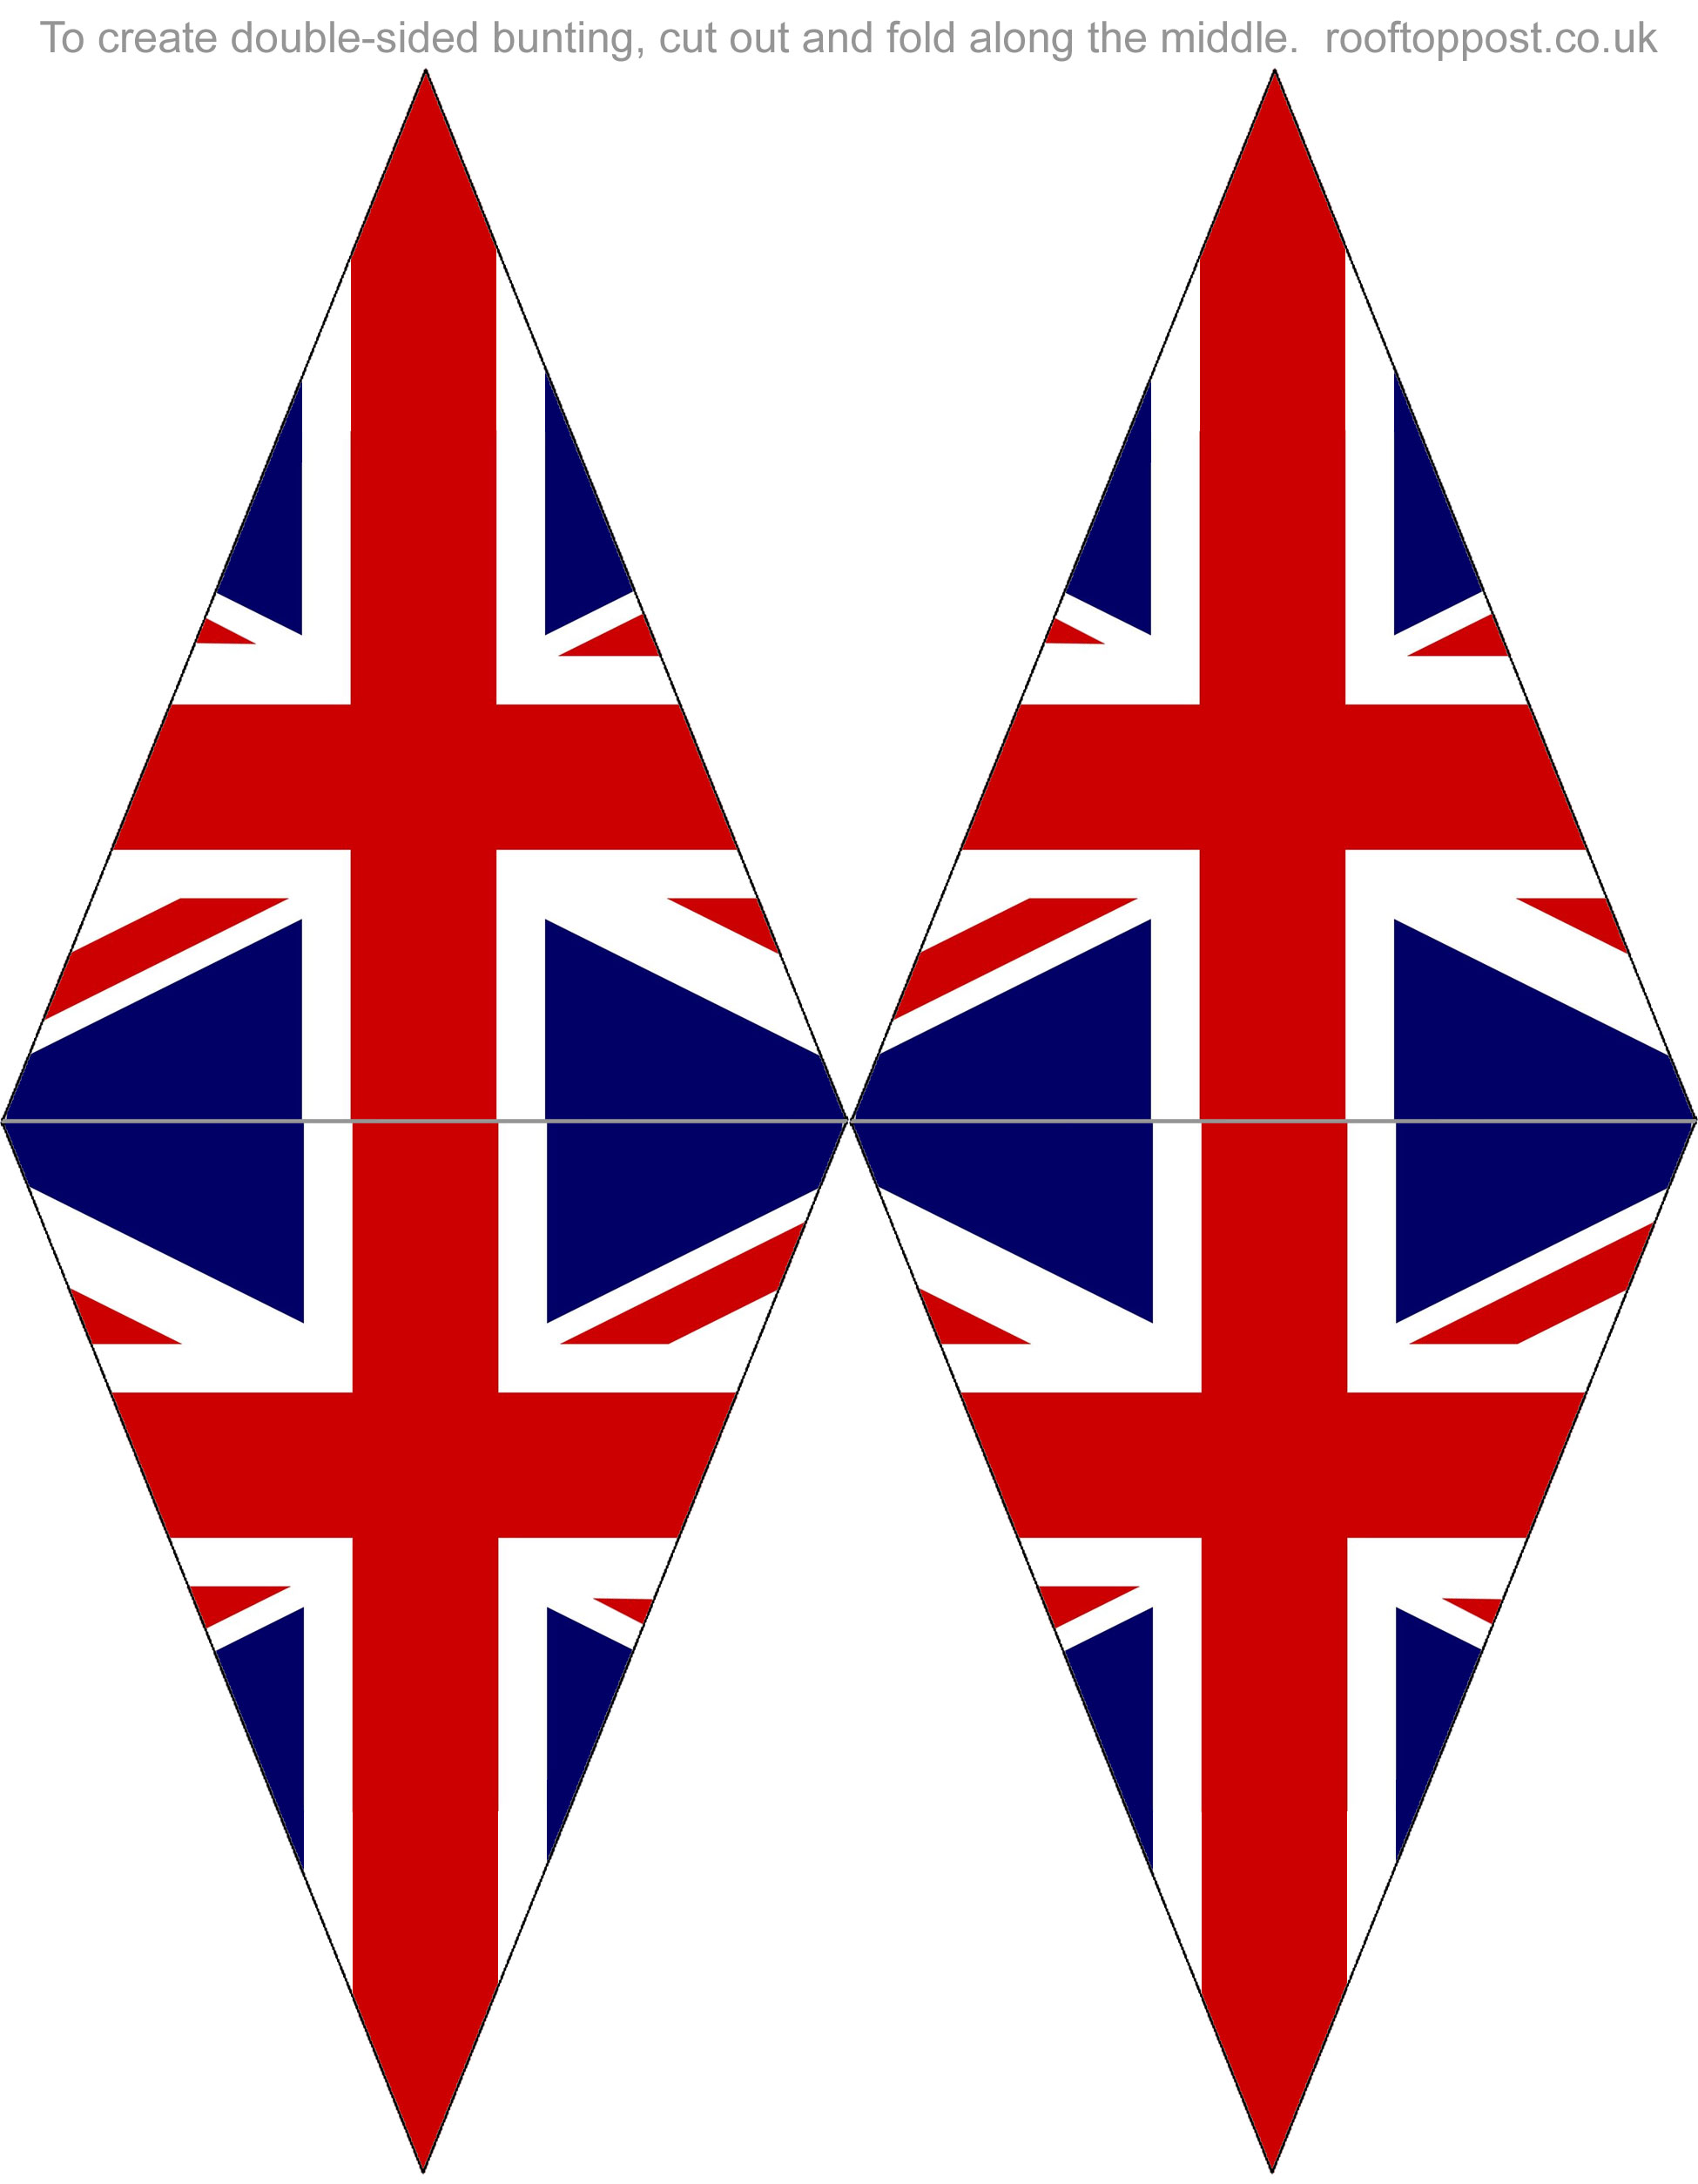 Printable foldable double-sided UK flags